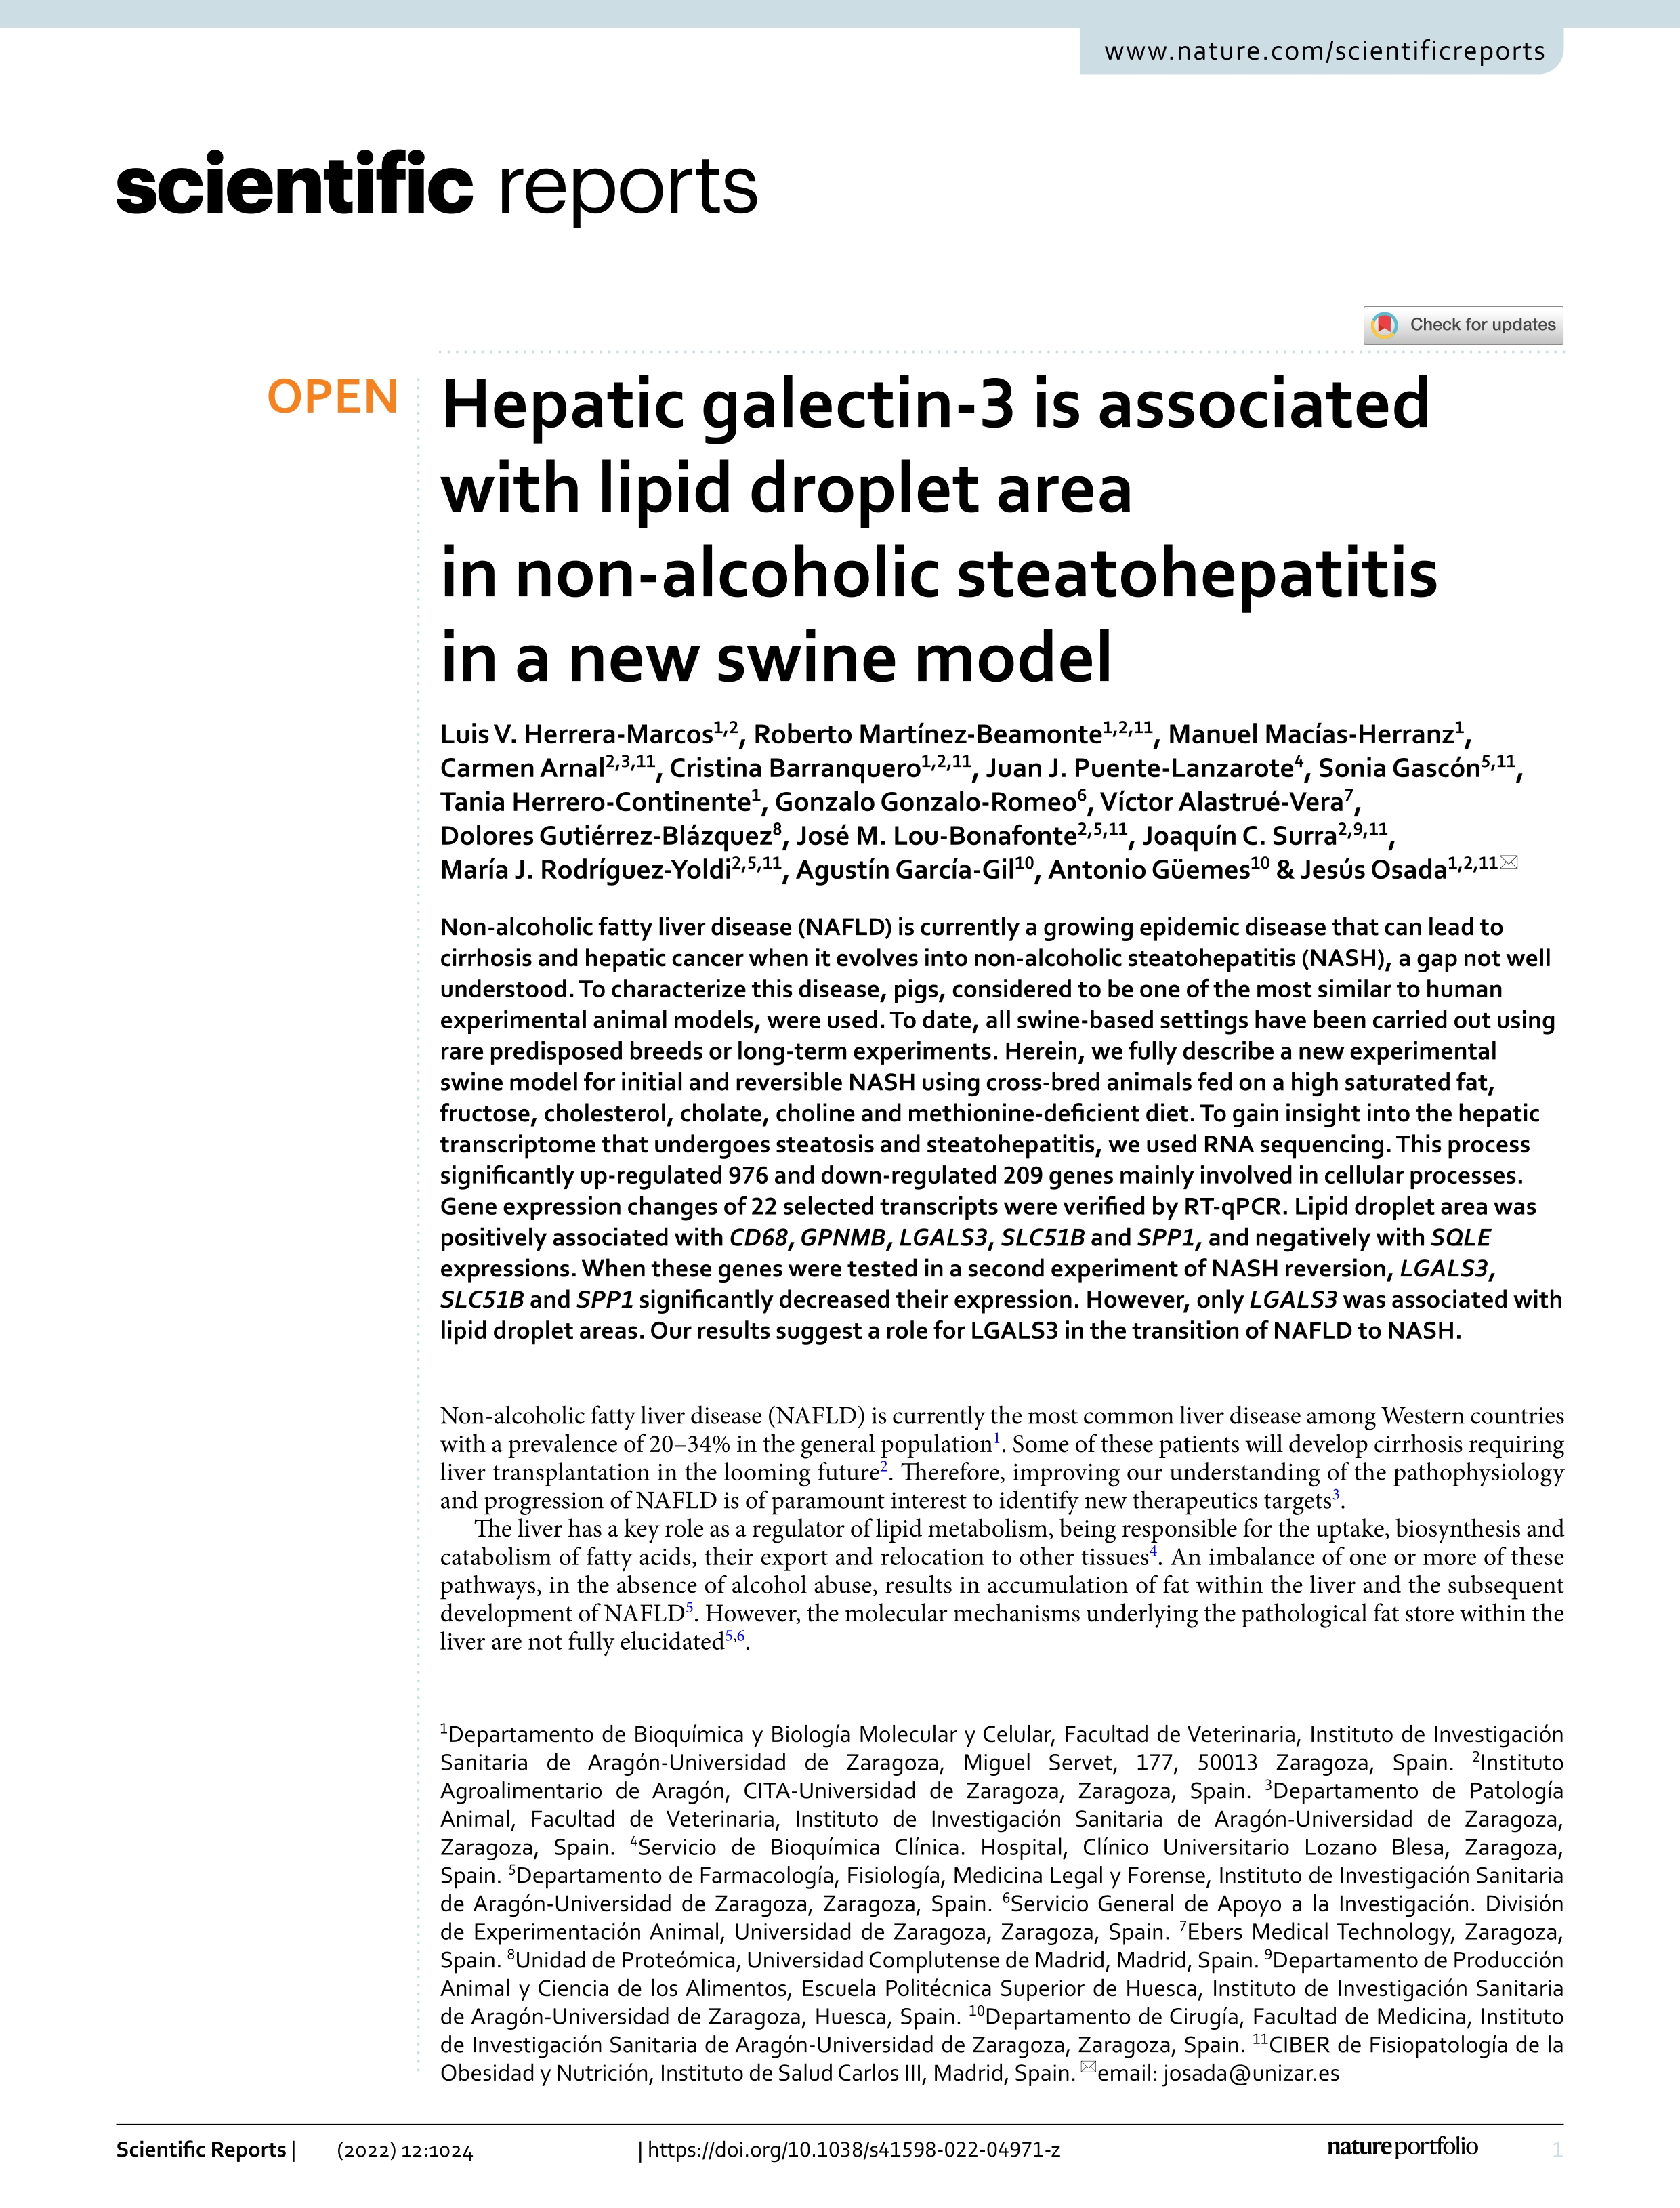 Hepatic galectin-3 is associated with lipid droplet area in non-alcoholic steatohepatitis in a new swine model